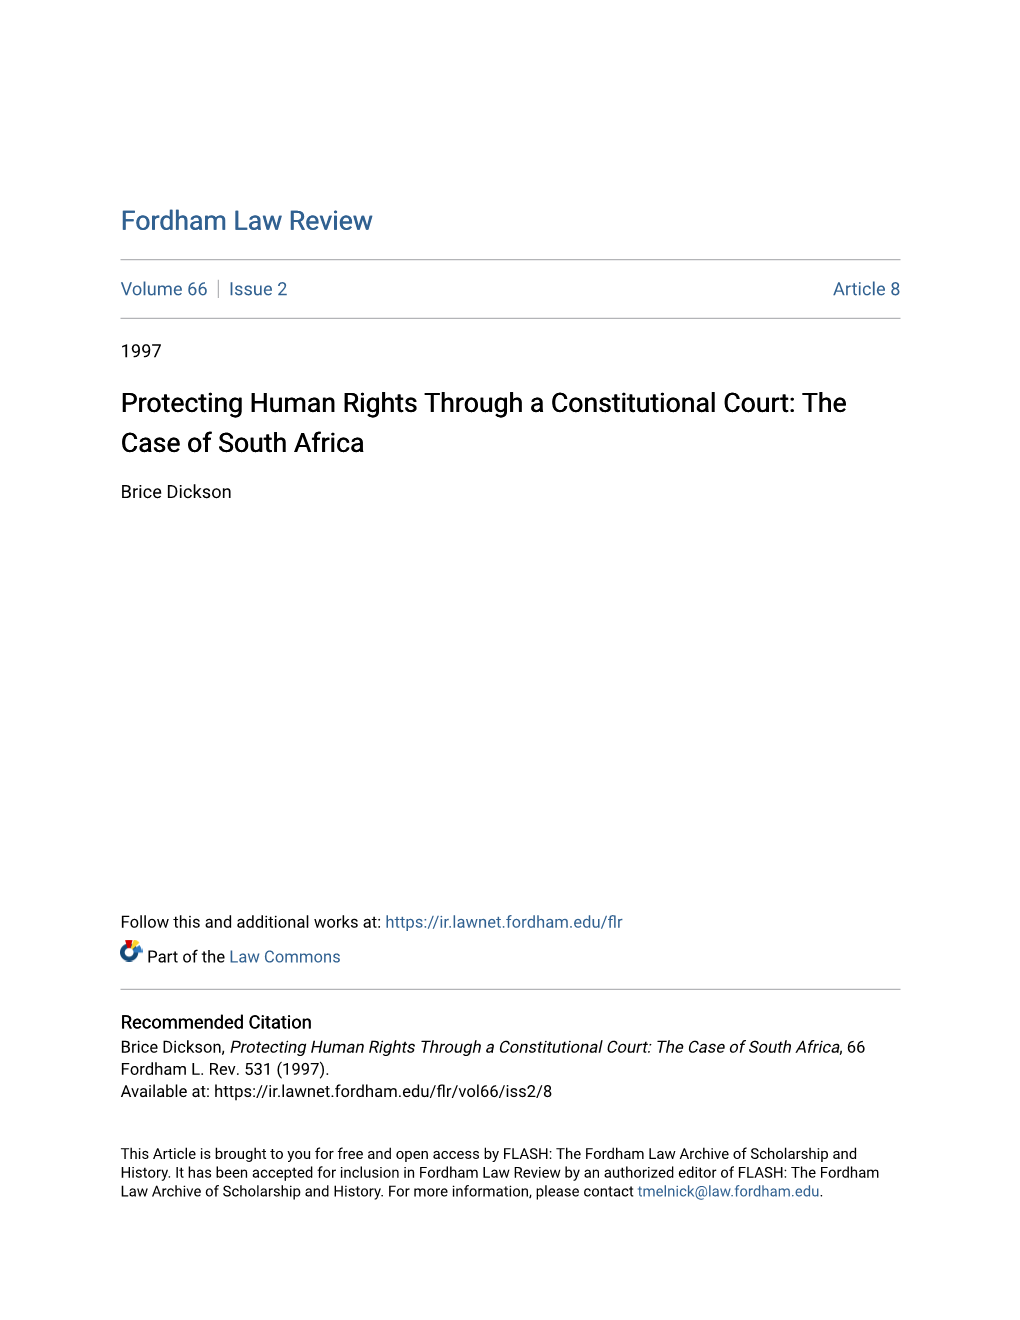 Protecting Human Rights Through a Constitutional Court: the Case of South Africa